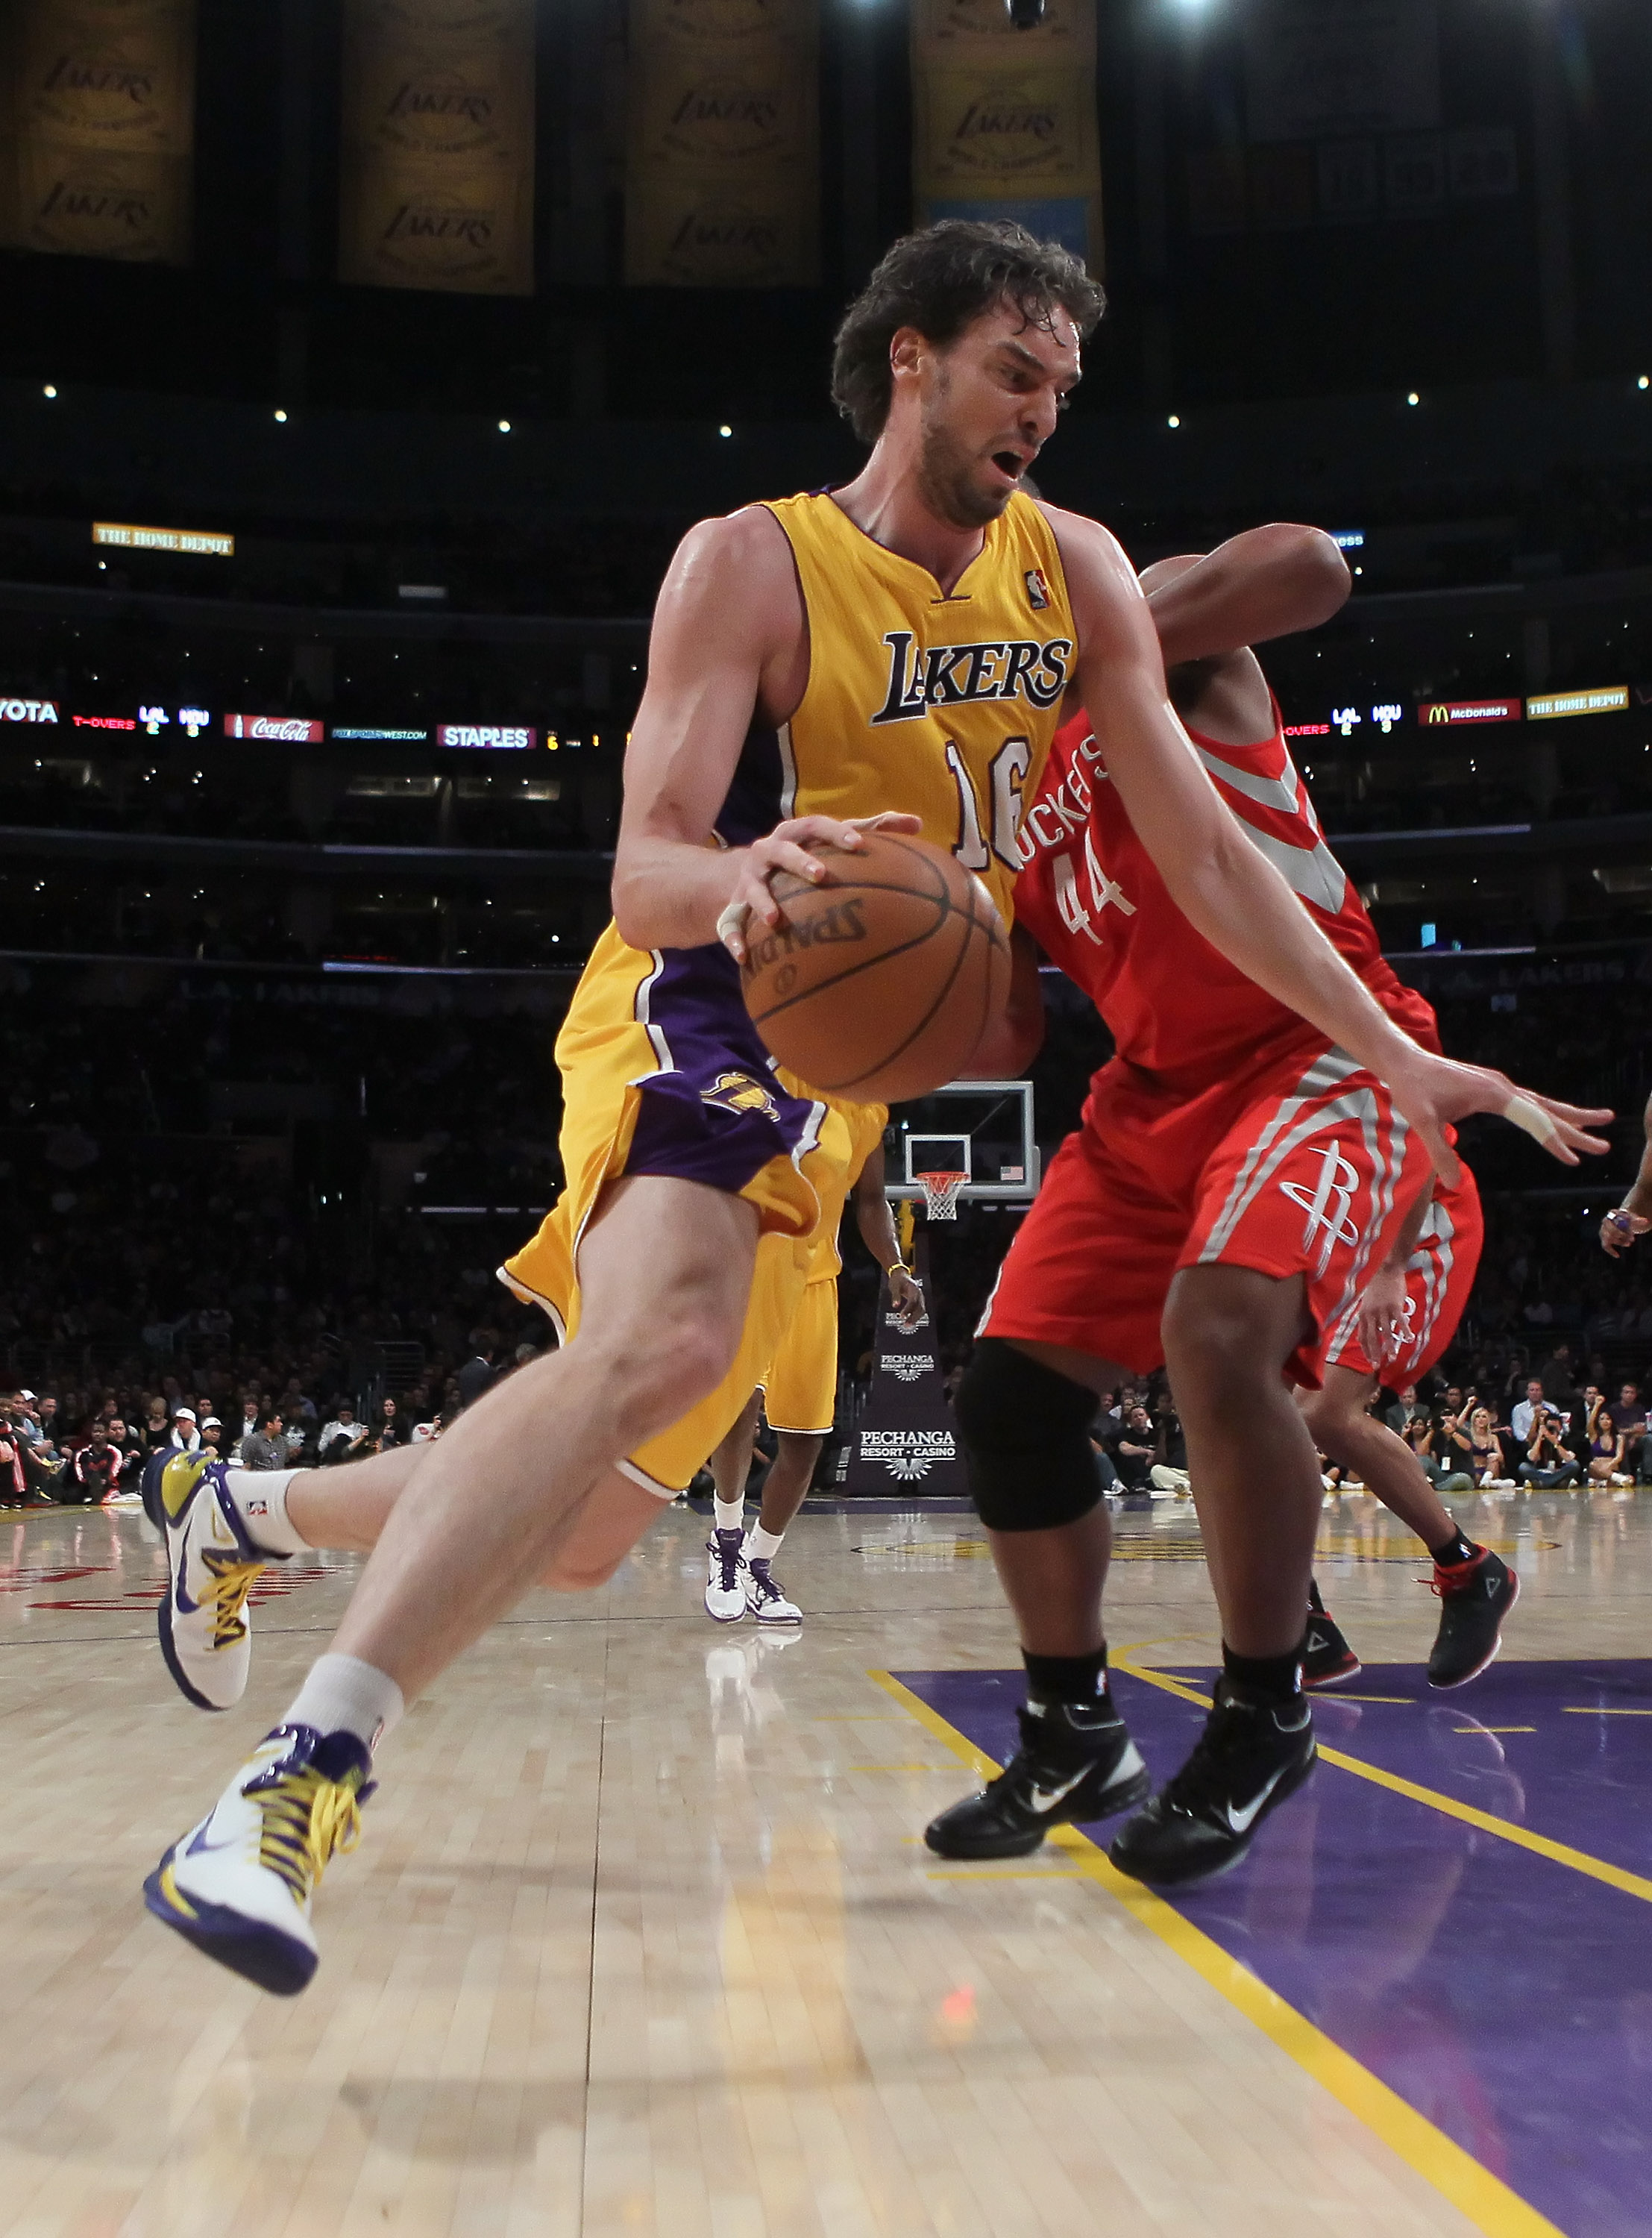 LOS ANGELES, CA - FEBRUARY 01:  Pau Gasol #16 of the Los Angeles Lakers drives around Chuck Hayes #44 of the Houston Rockets in the first half at Staples Center on February 1, 2011 in Los Angeles, California. The Lakers defeated the Rockets 114-106. NOTE